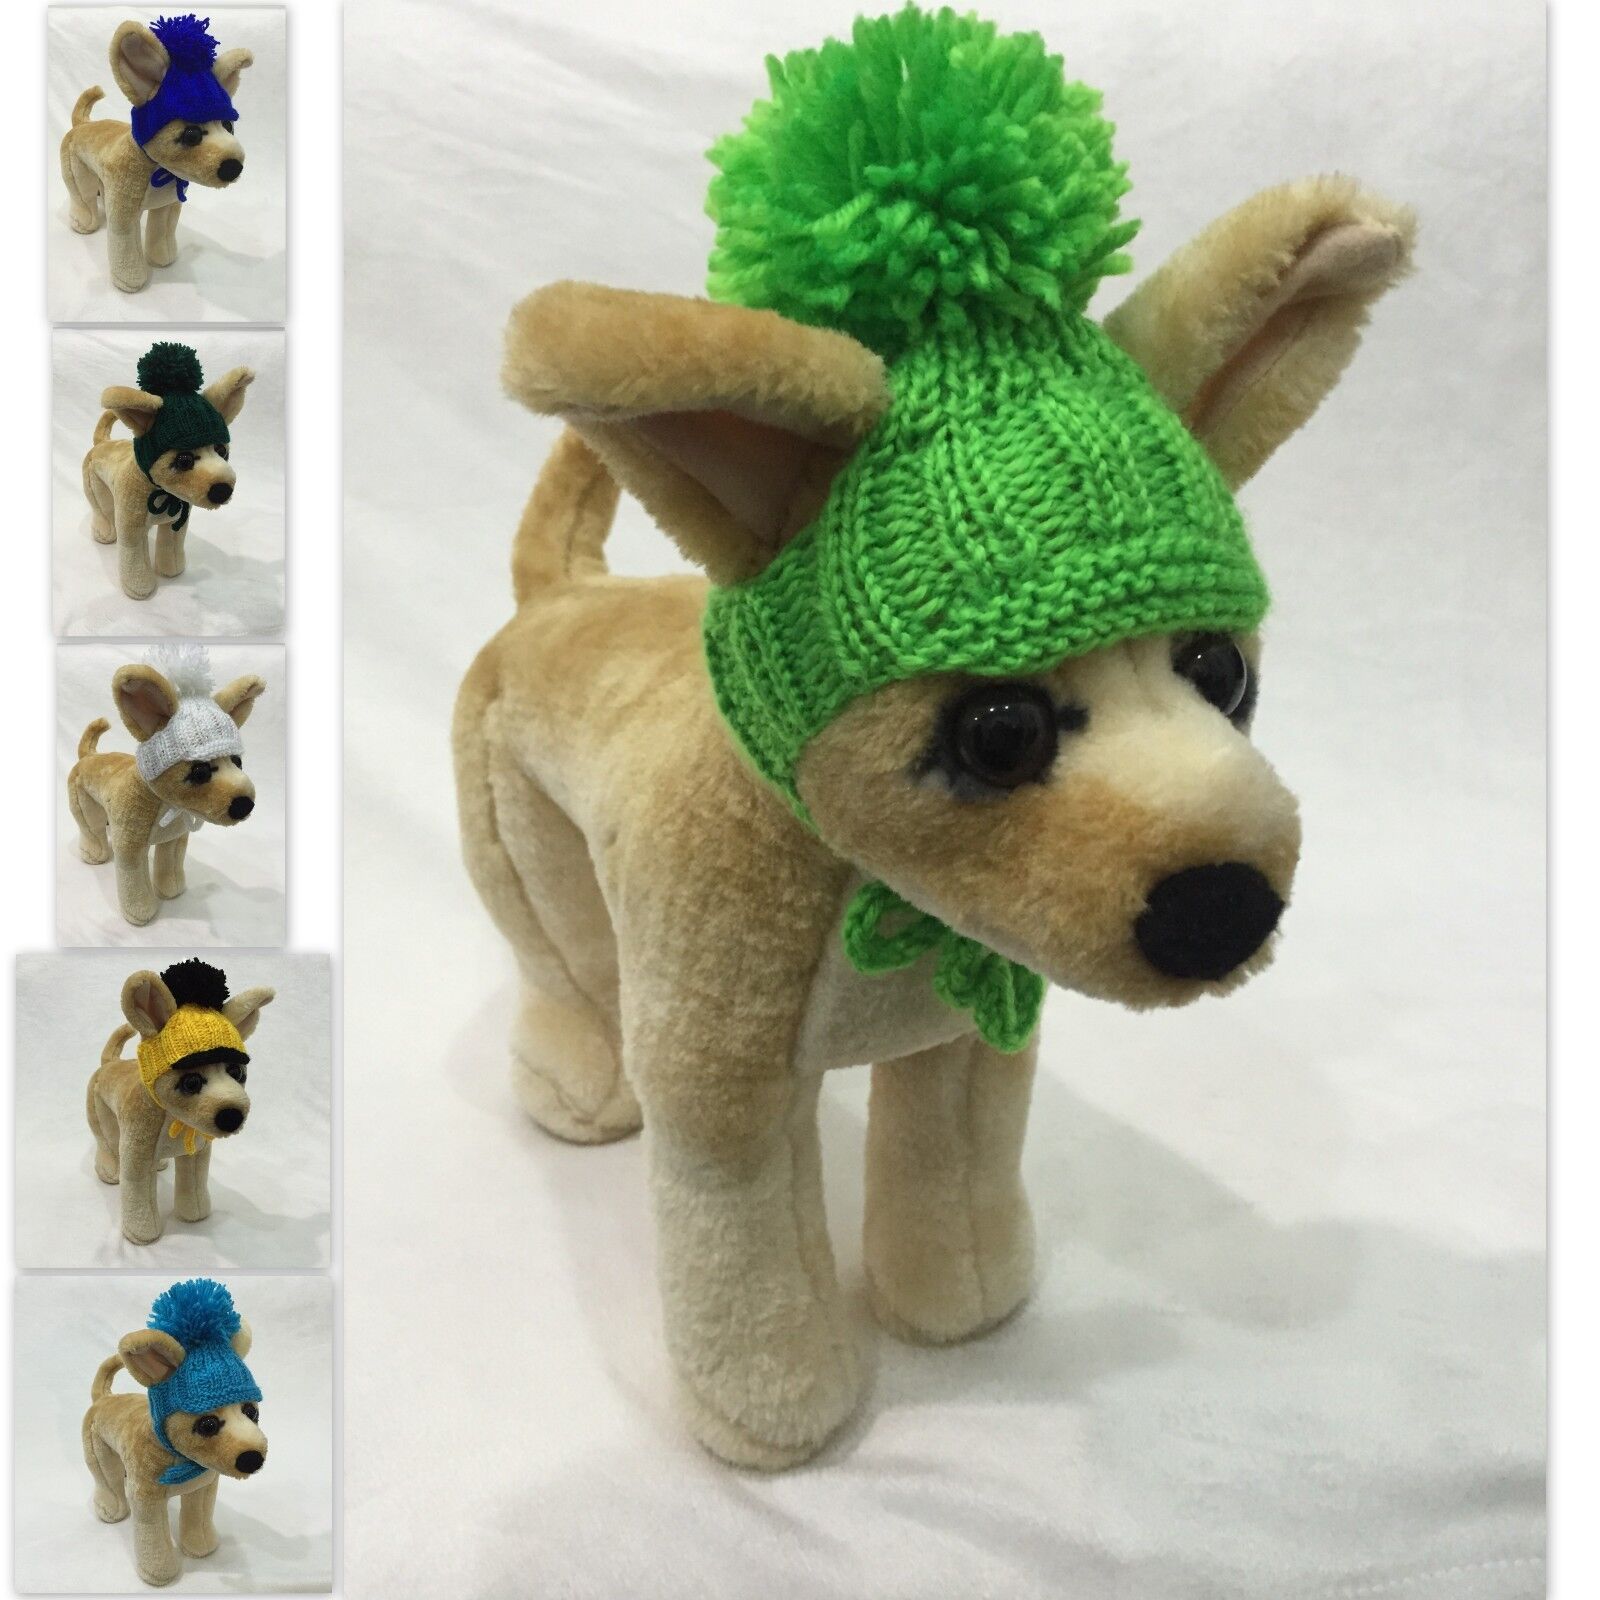 Handmade Knit Clothes Pompom Visor Hat With Ties for Dogs / Pets Size XXS, XS, S